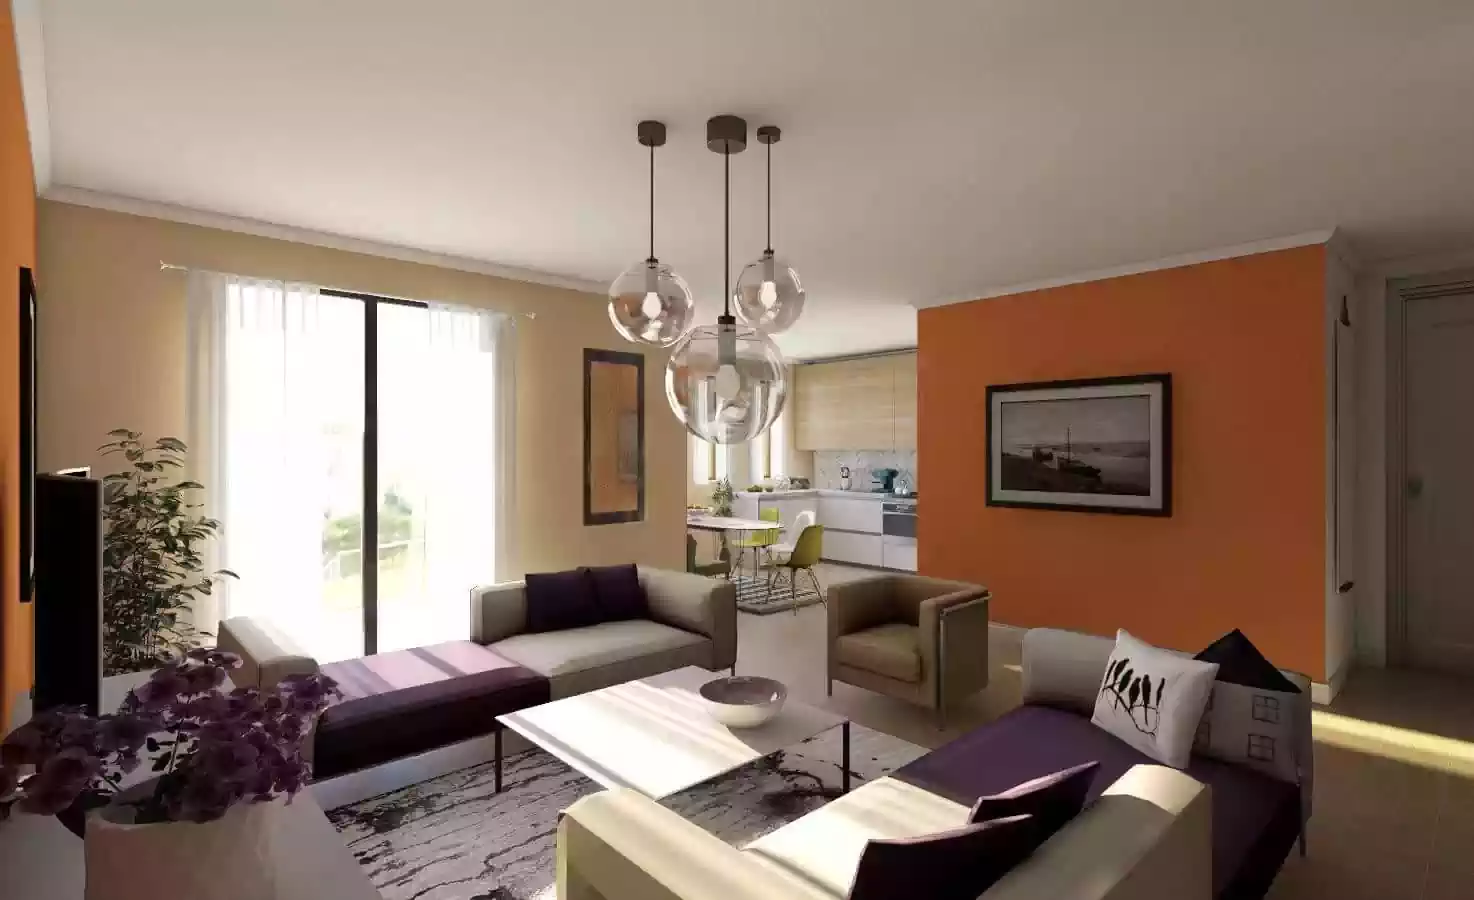 Open plan garden flat layout with large door leading to garden and kitchen slightly separated by nook. Orange walls and purple furniture